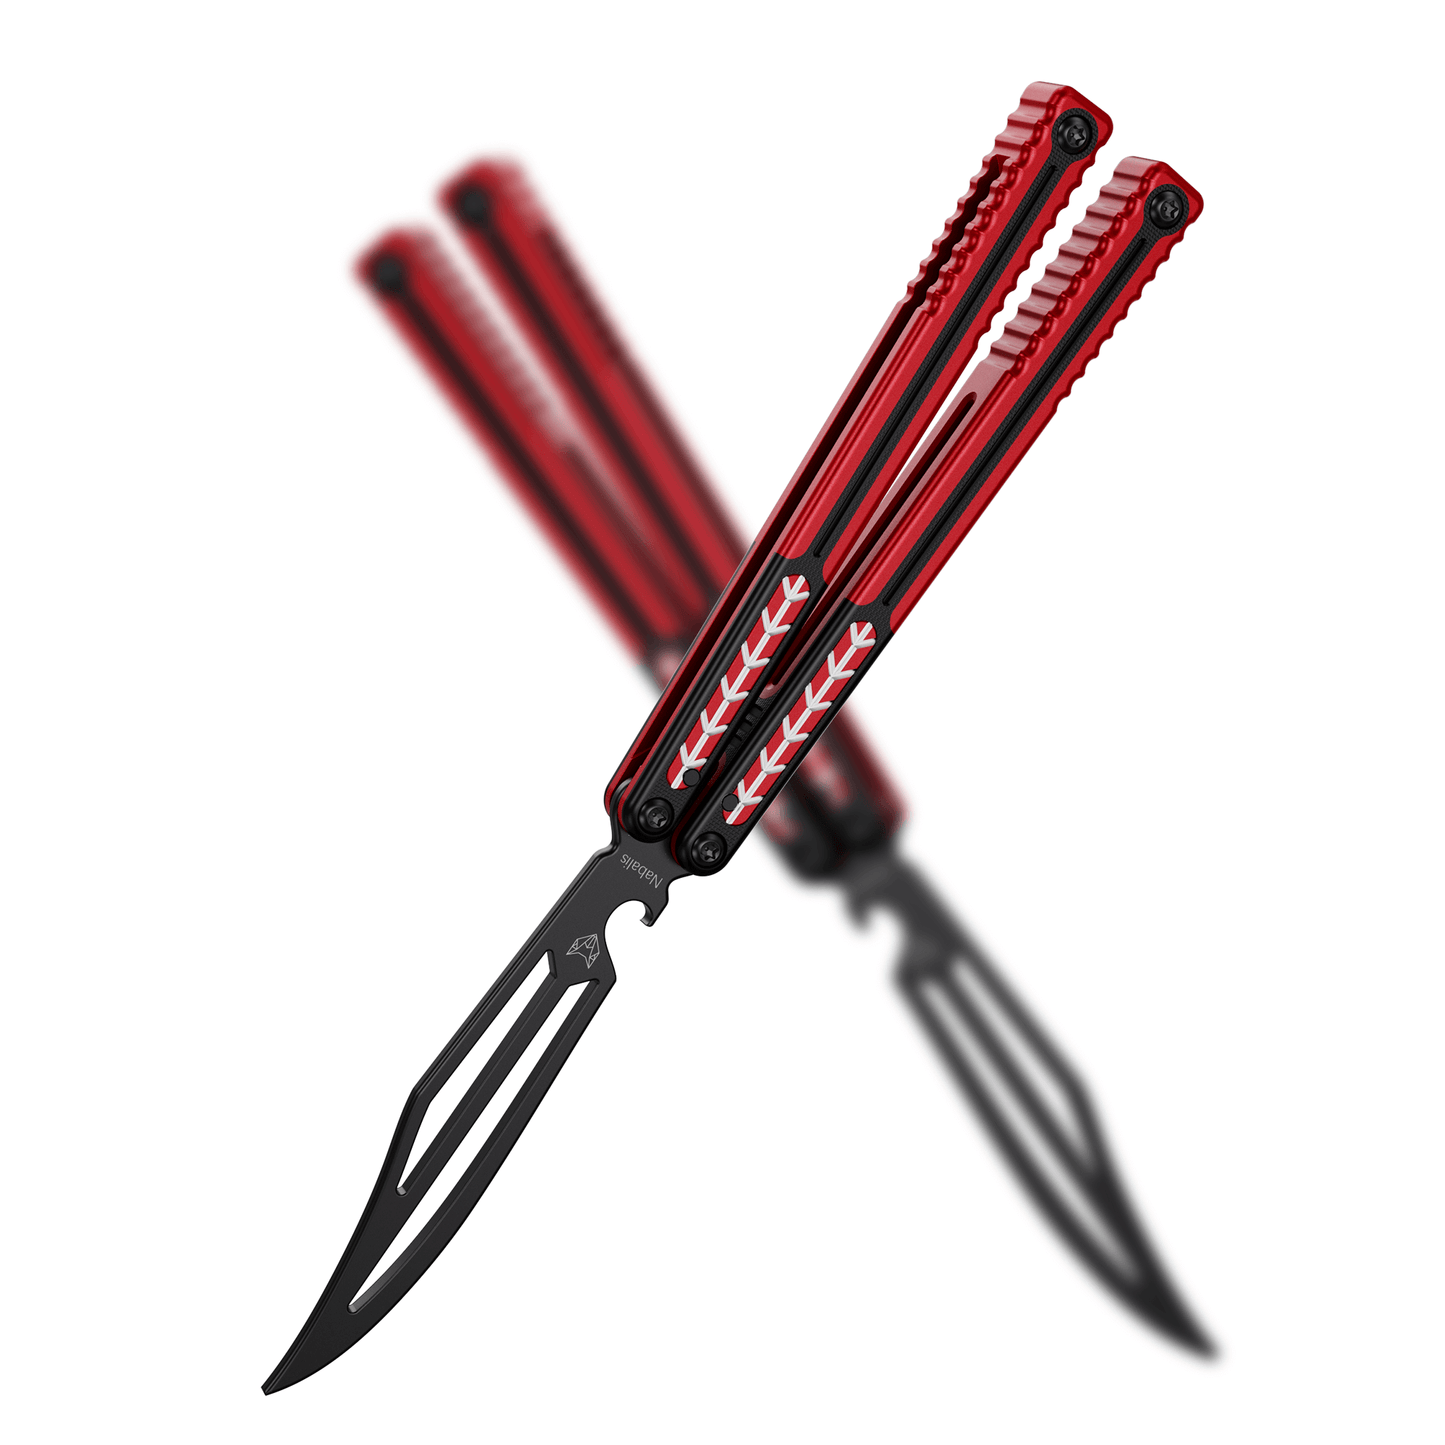 Nabalis Vulp Pro Balisong Butterfly Knife Trainer-Red